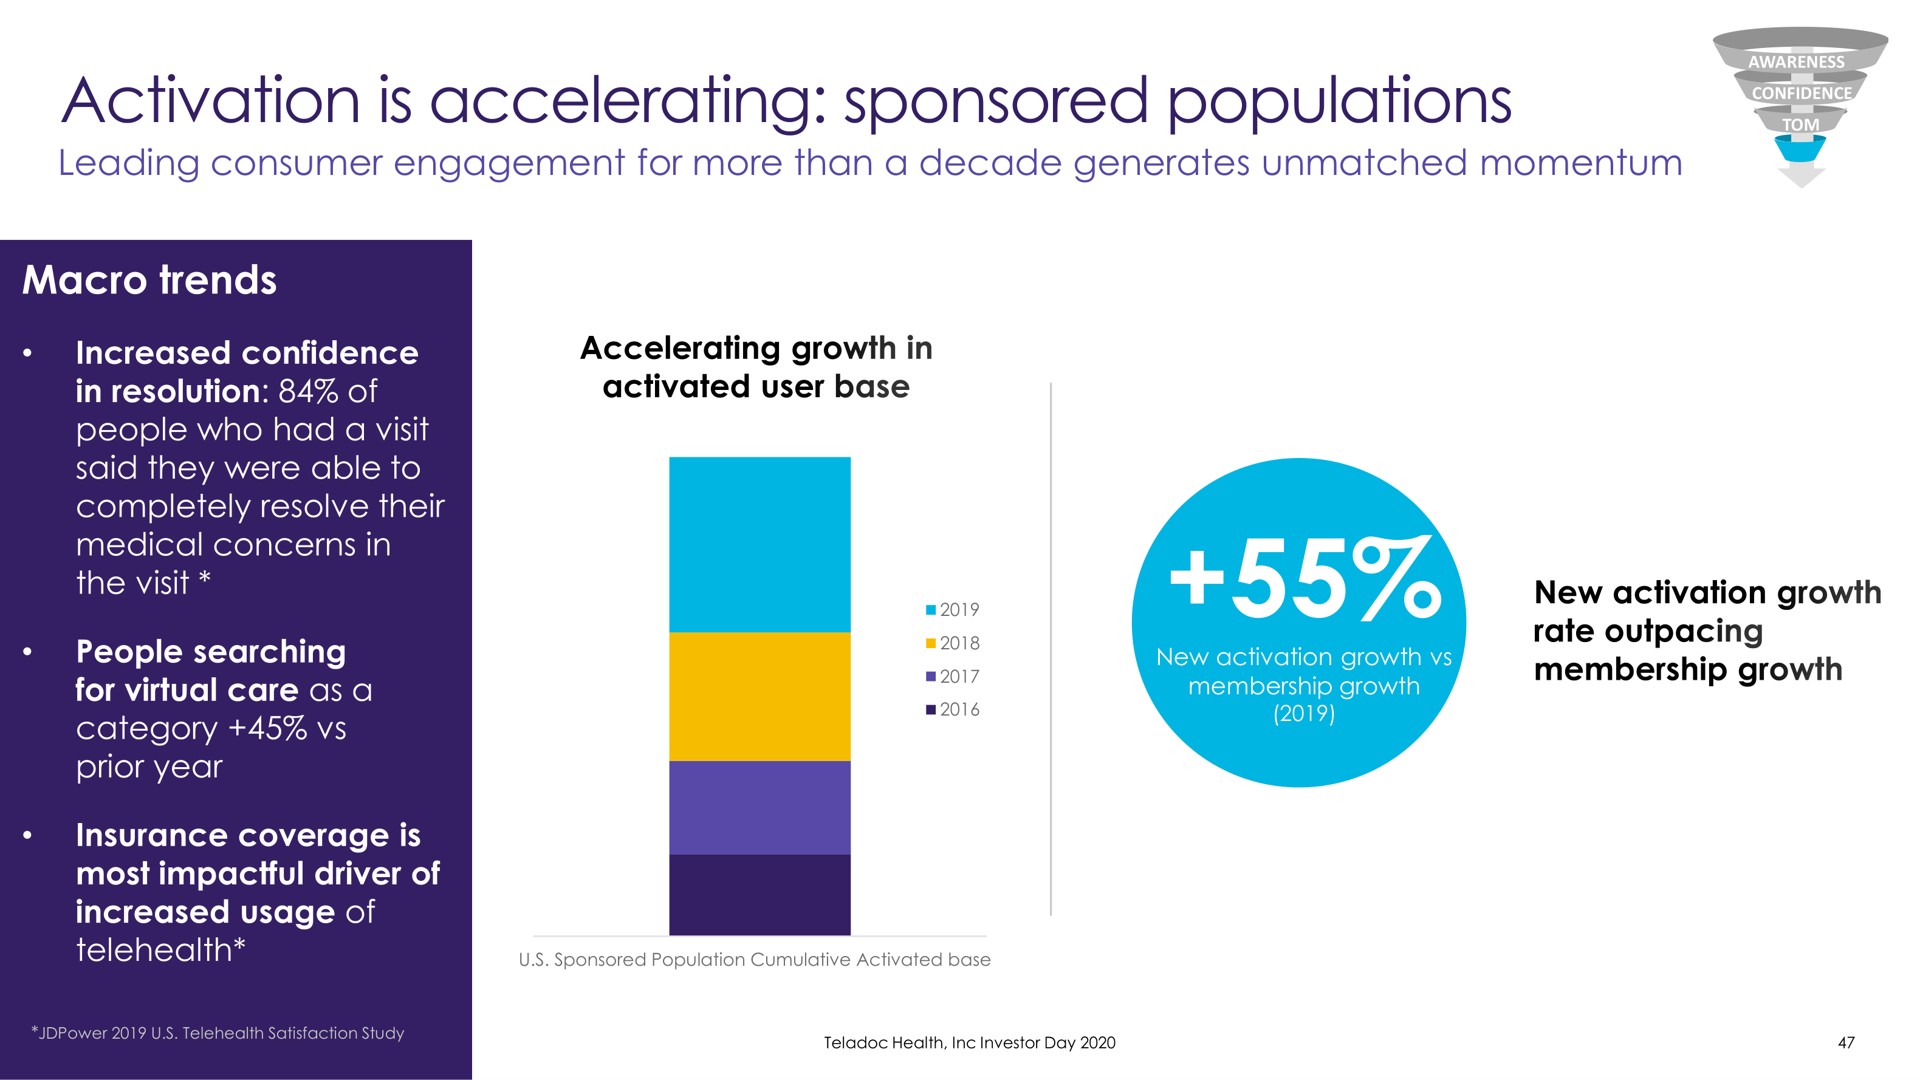 leading consumer engagement for more than a decade generates unmatched momentum activation is accelerating populations | Teladoc